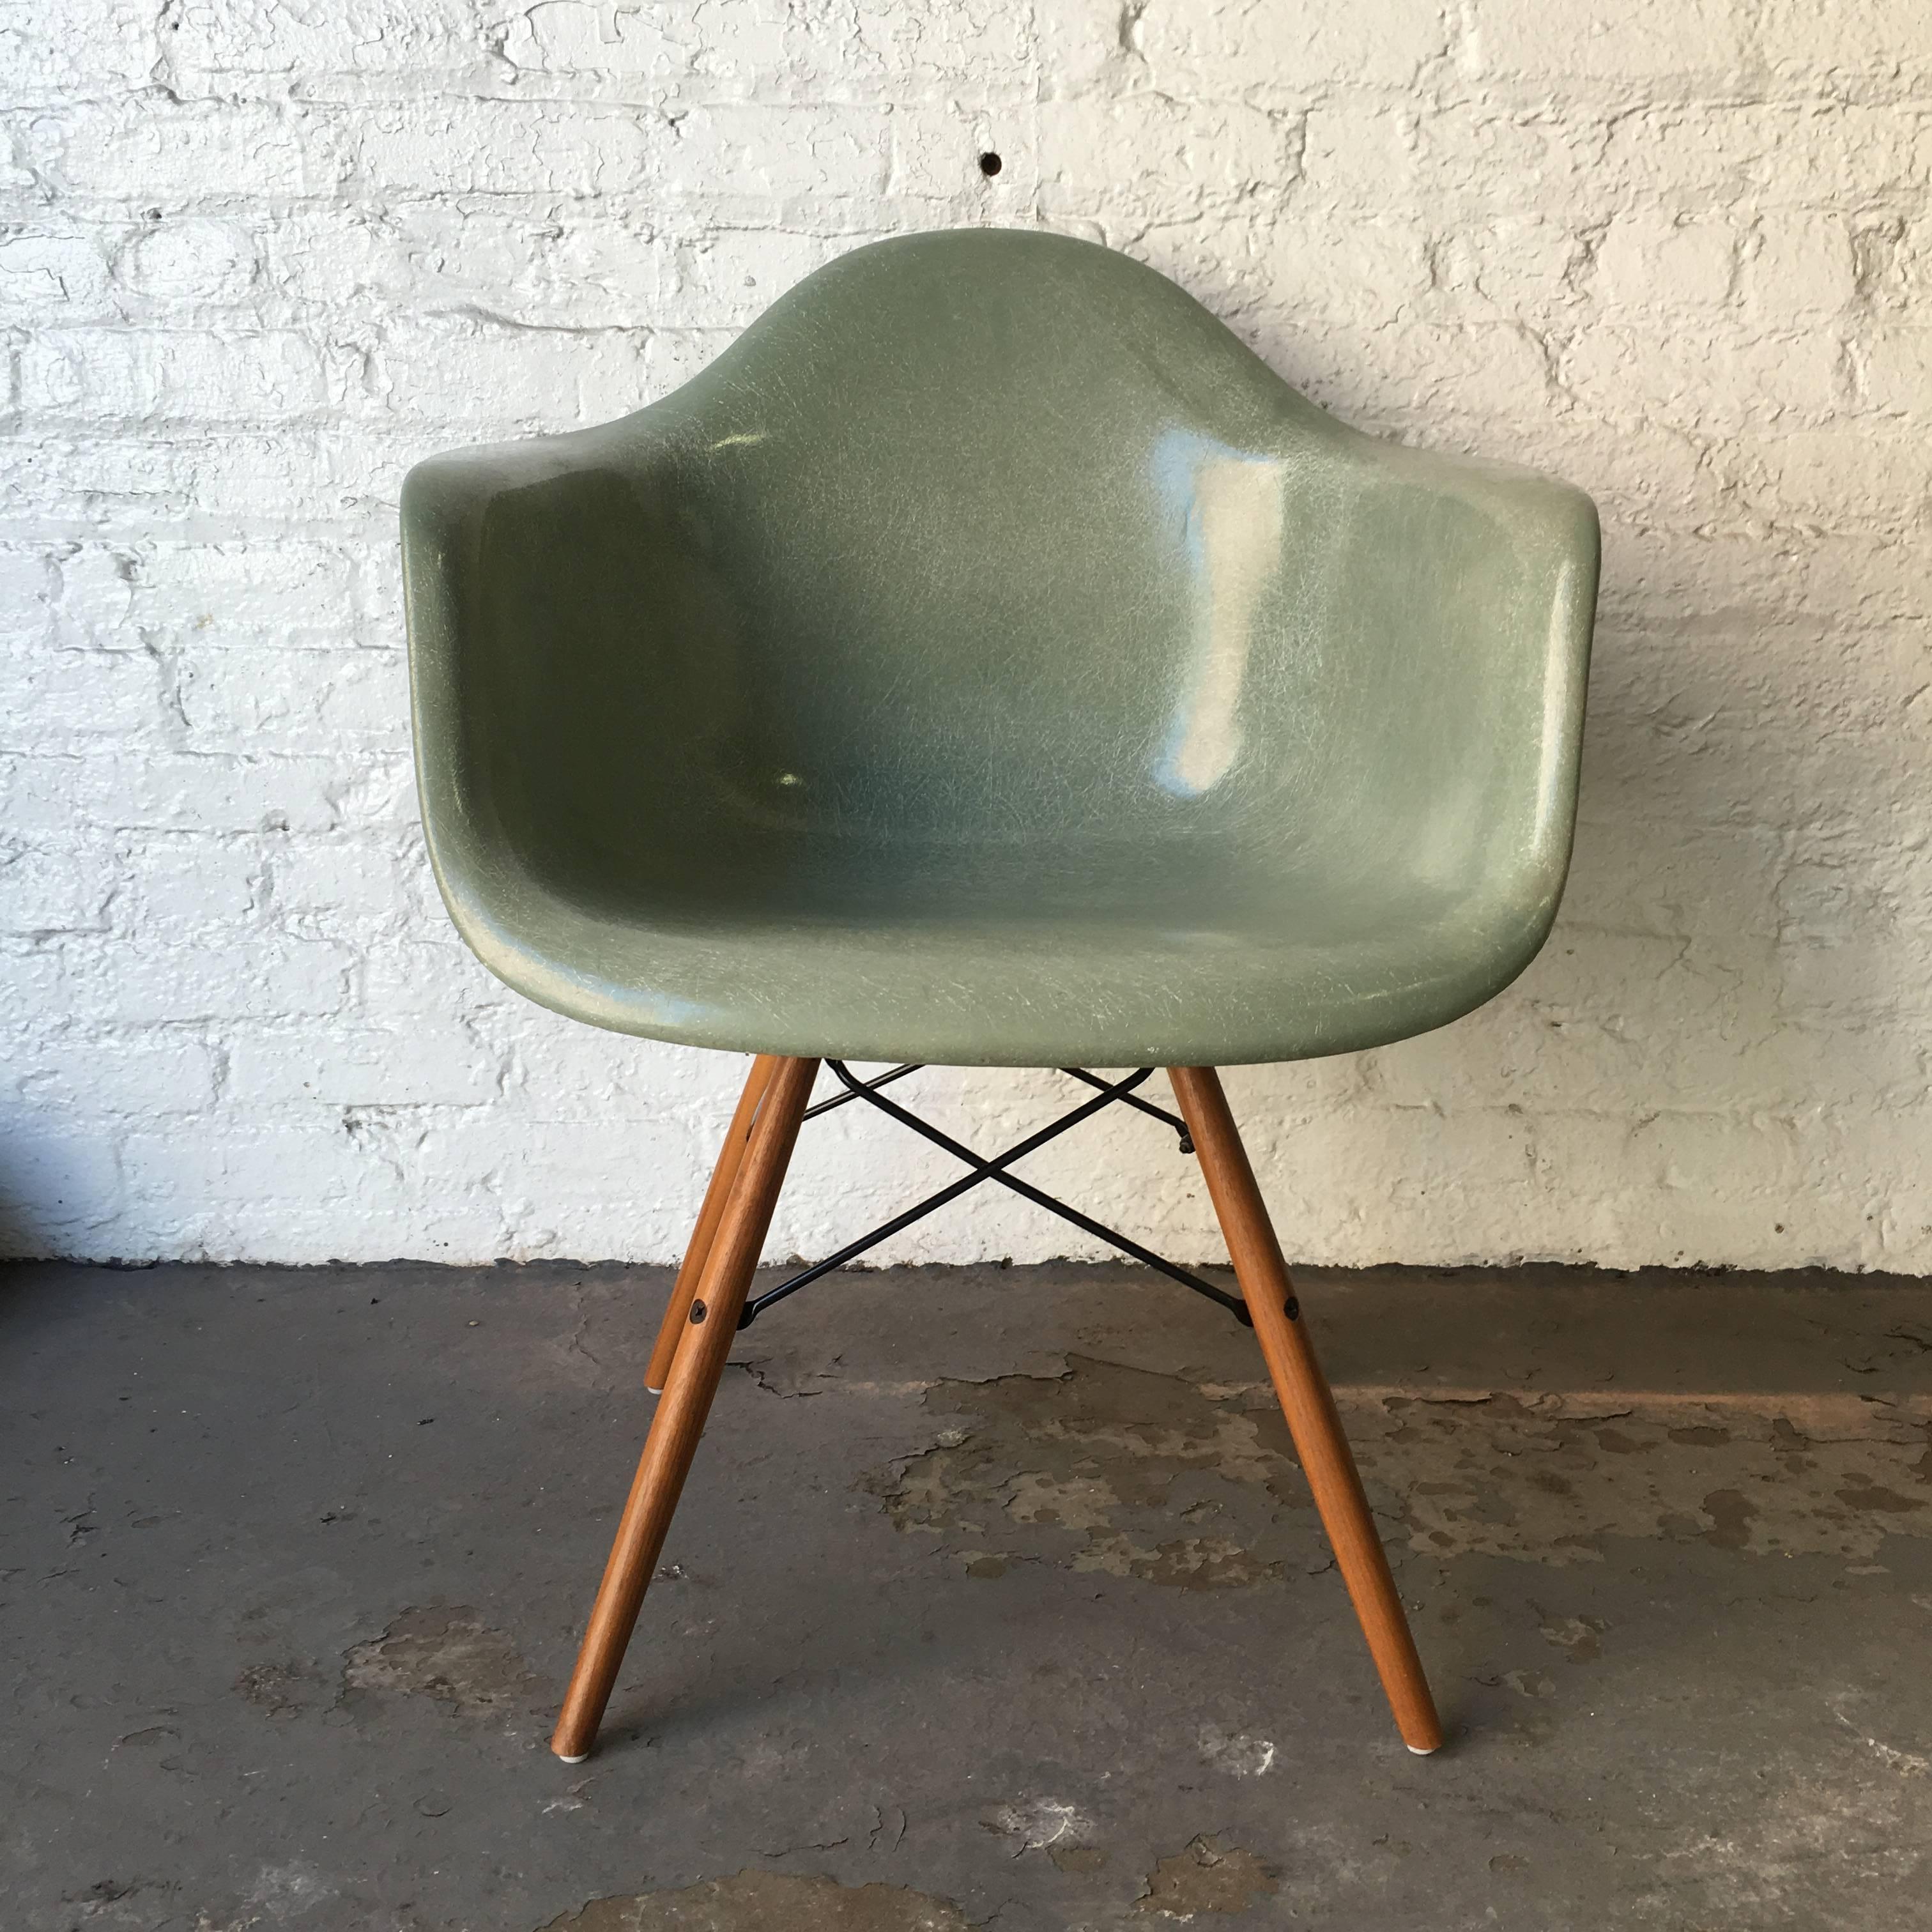 Herman Miller Eames fiberglass armchair in seafoam green. Exceptional color with no fading or cracks. Newer dowel base.